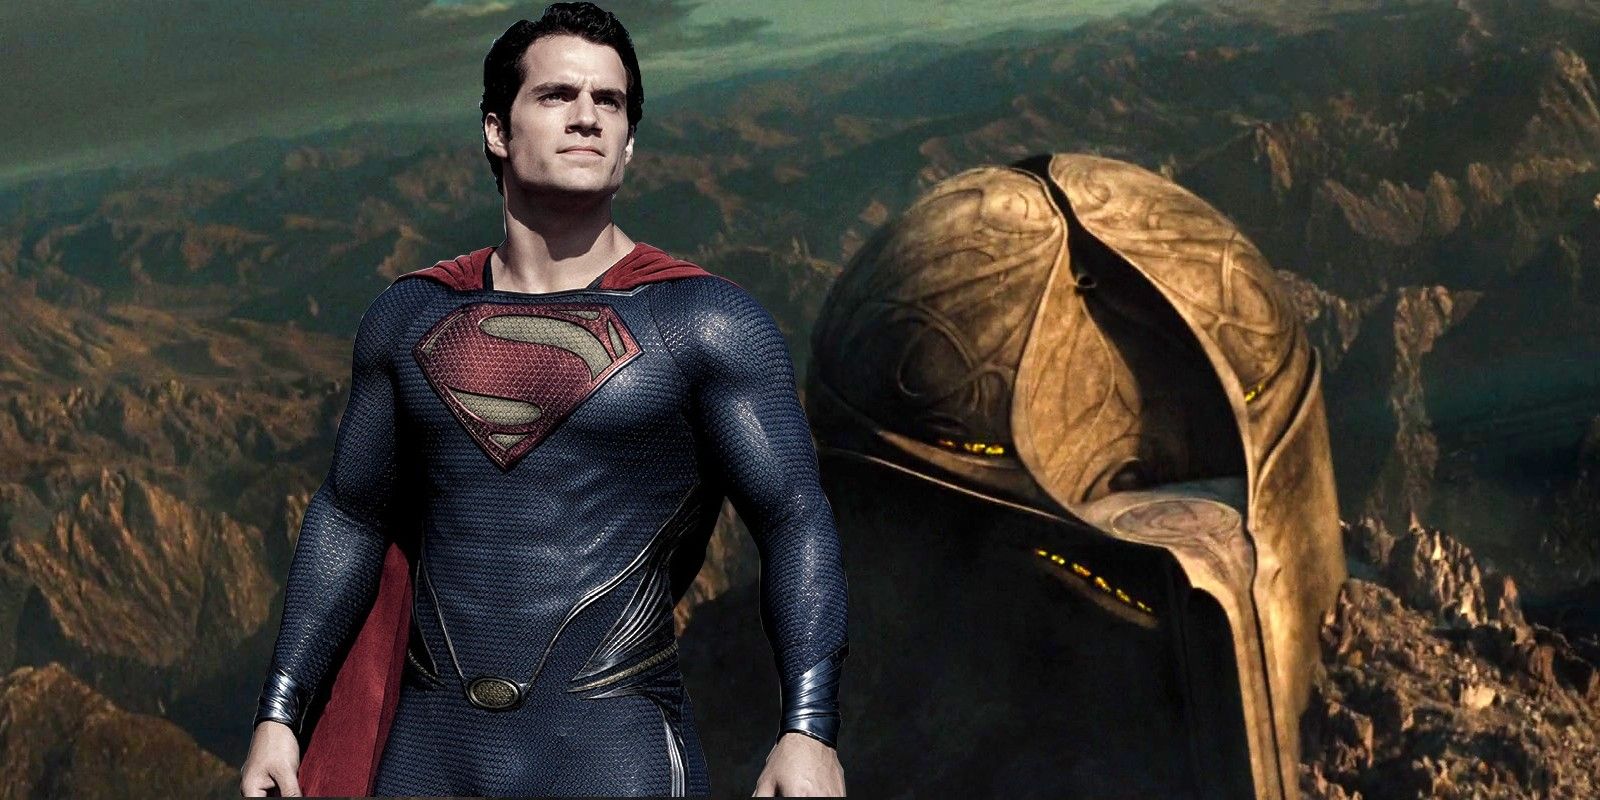 Henry Cavill as Superman and House of El Citadel in Man of Steel